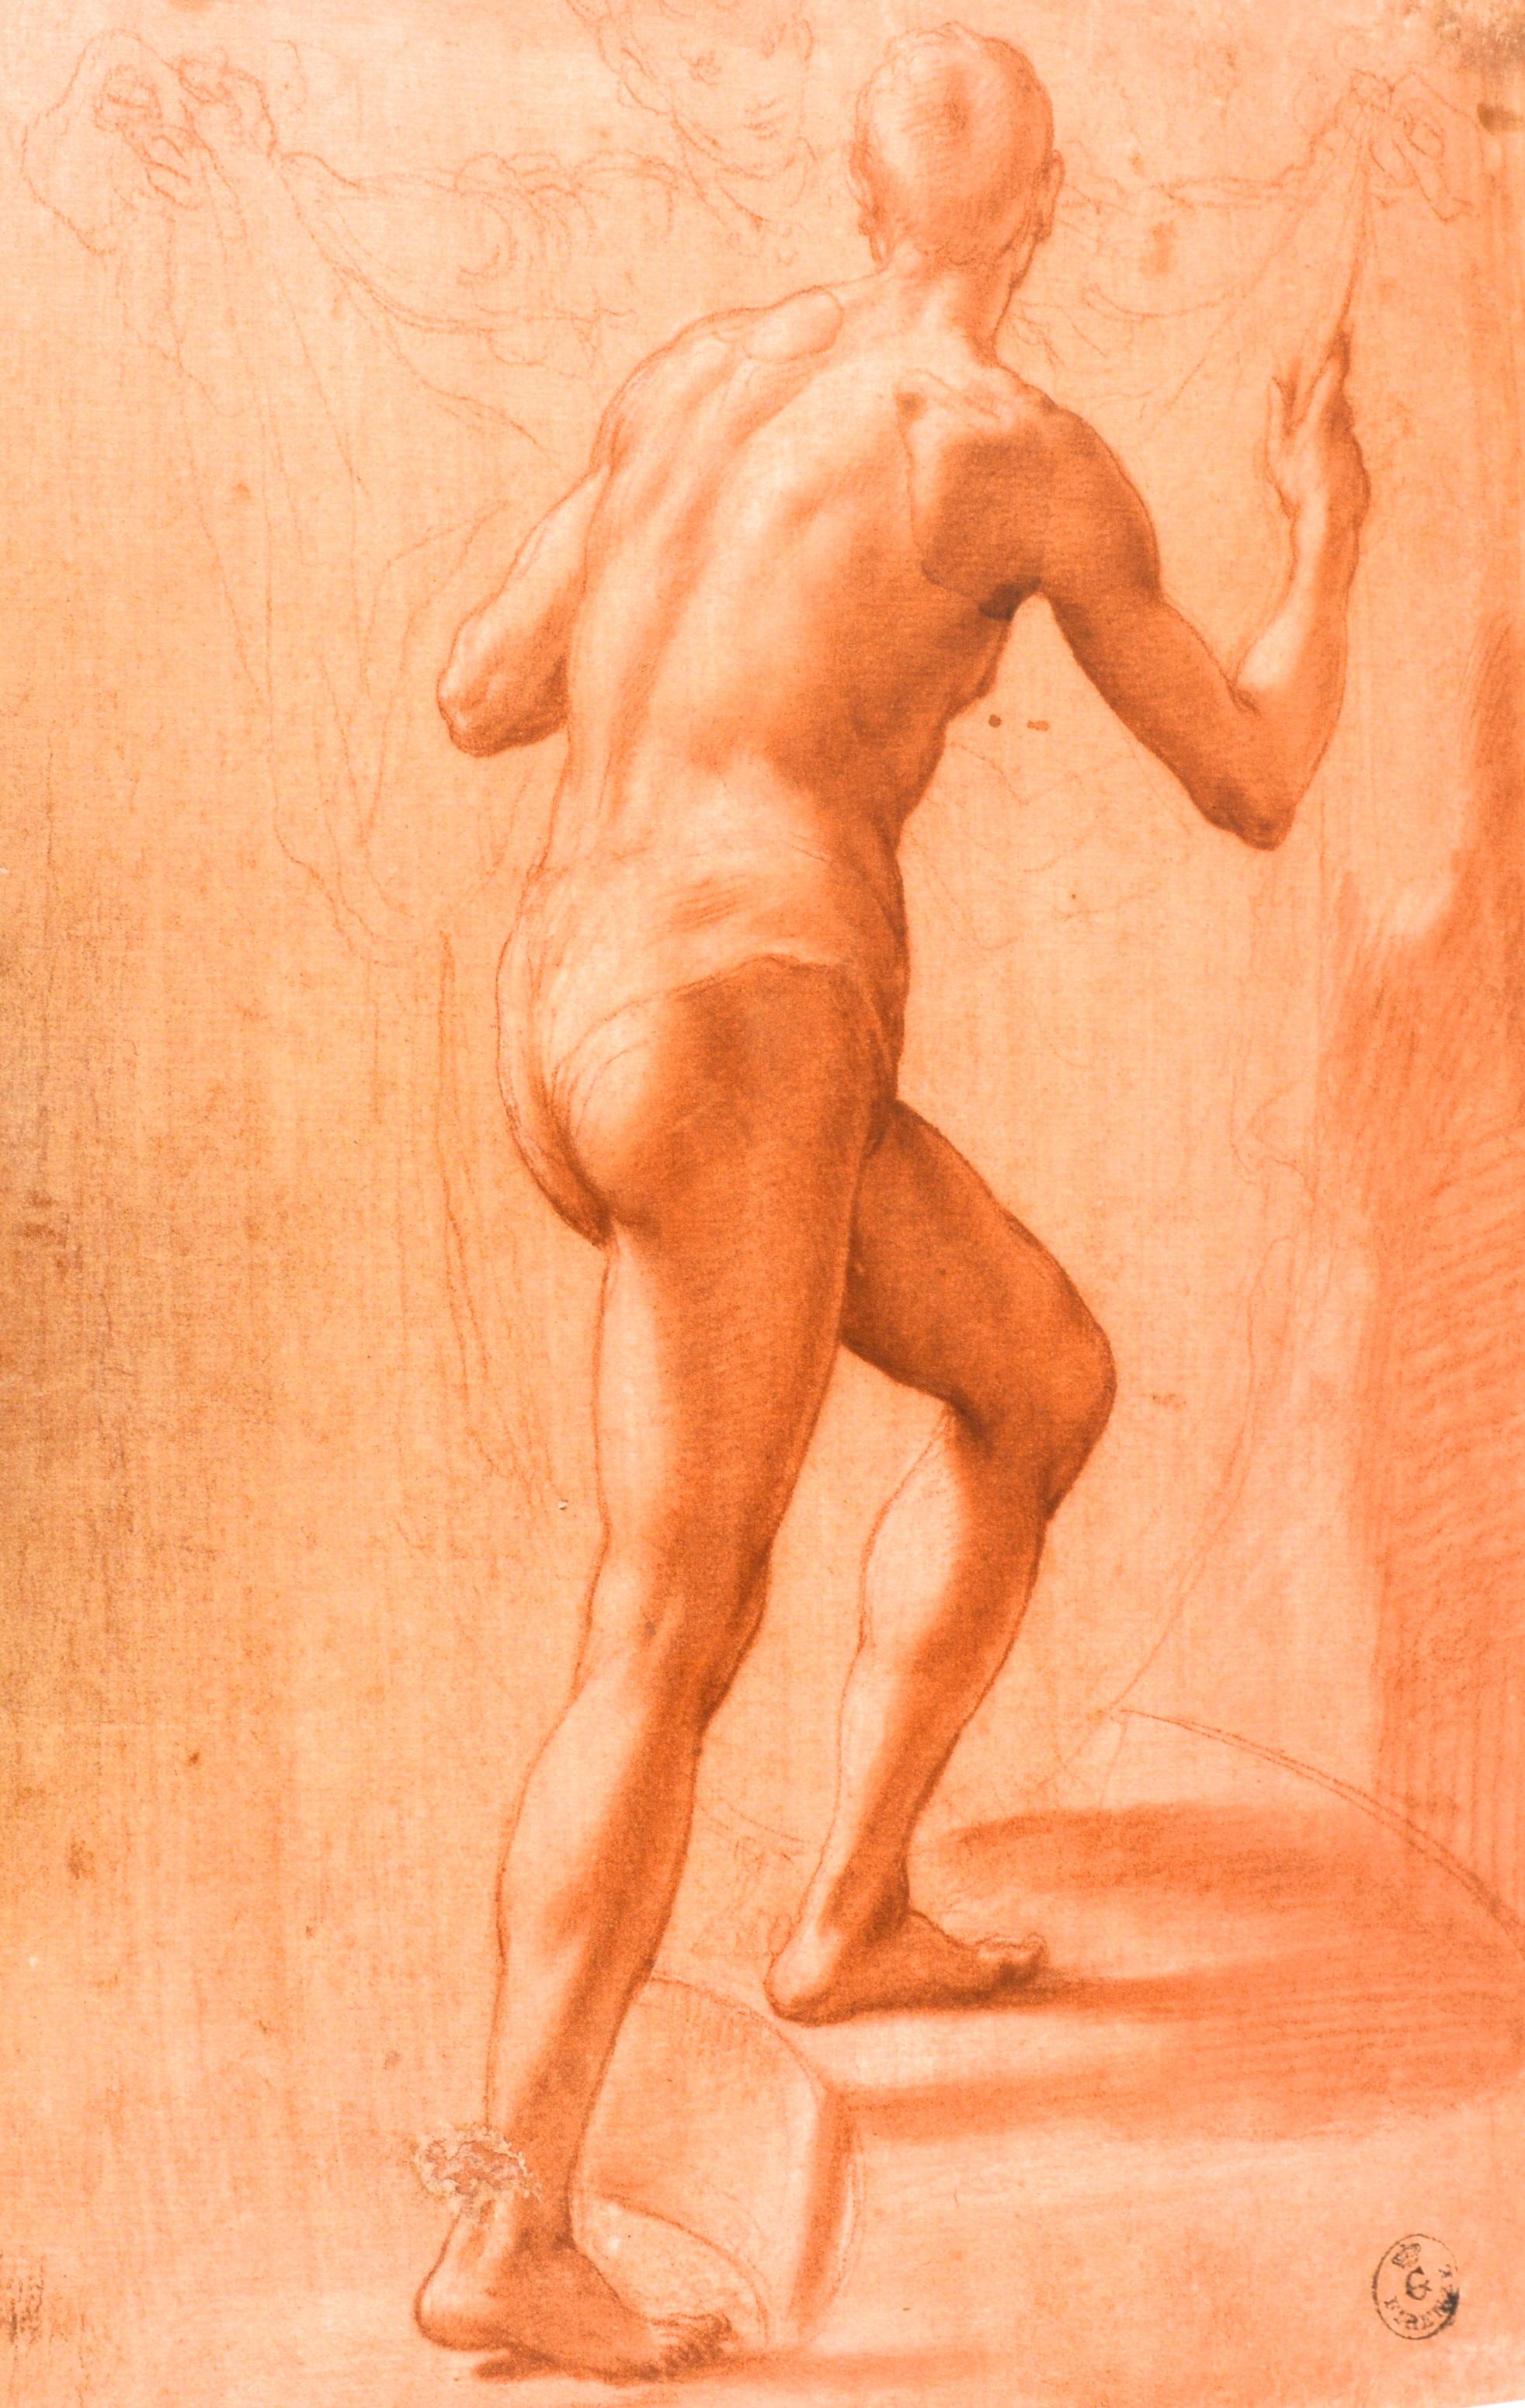 Michelangelo, Vasari, and Their Contemporaries: Drawings from the Uffizi, 1st Ed 2